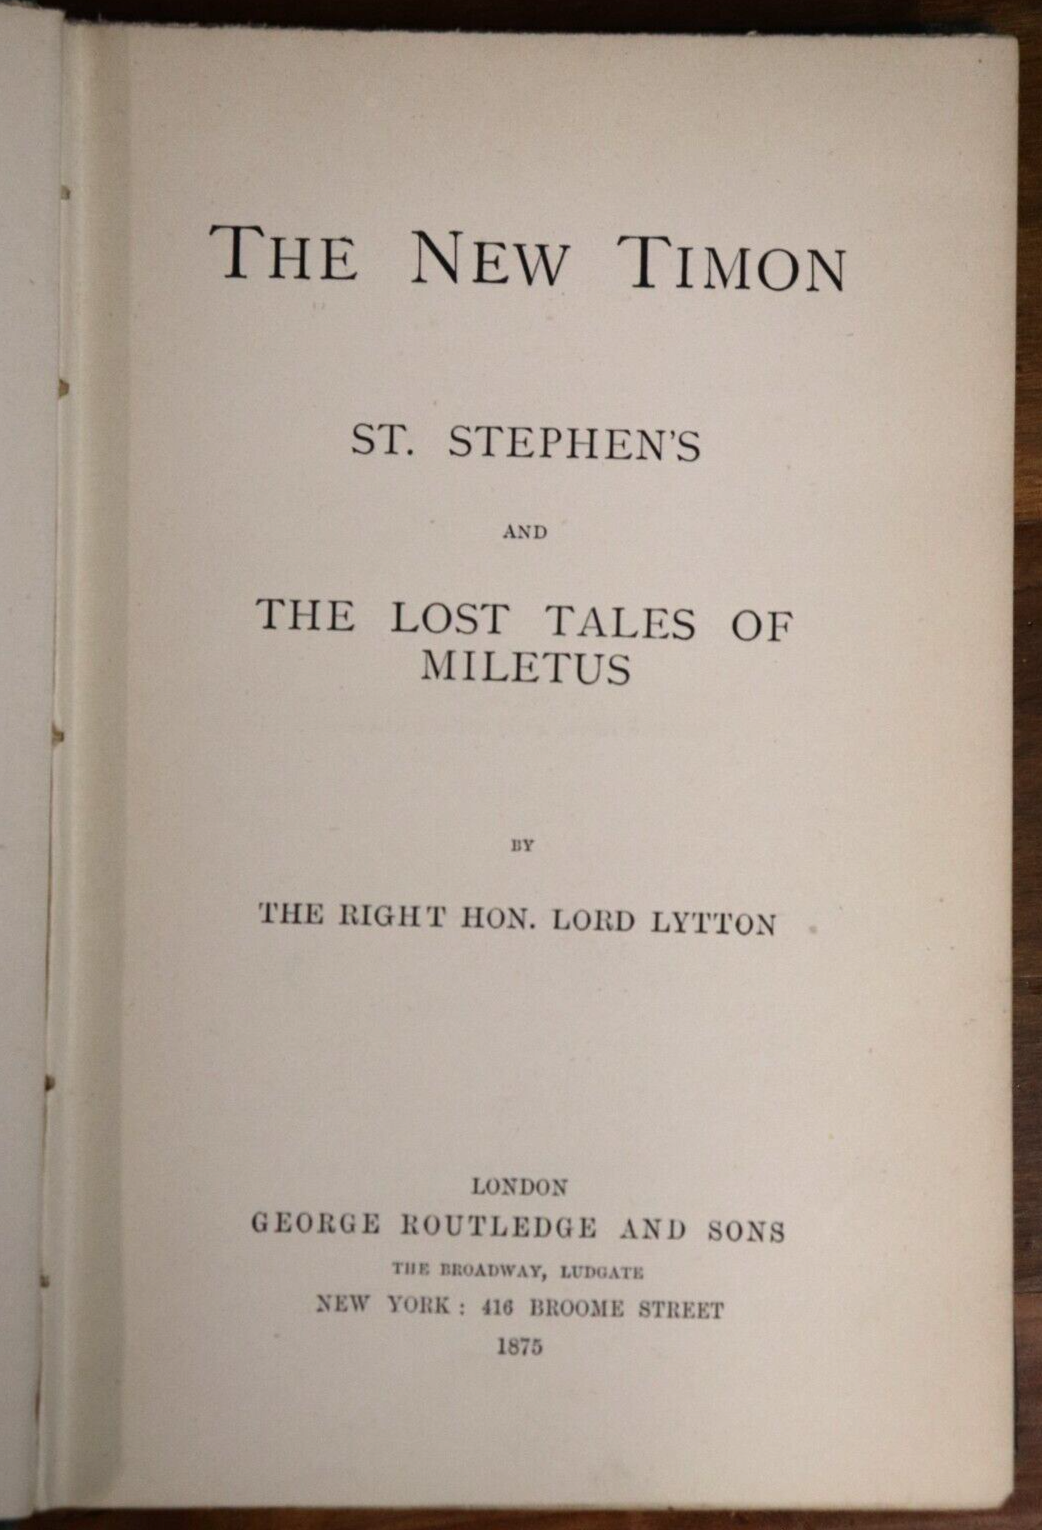 The New Timon by Lord Lytton - 1875 - Antique Poetry & Literature Book